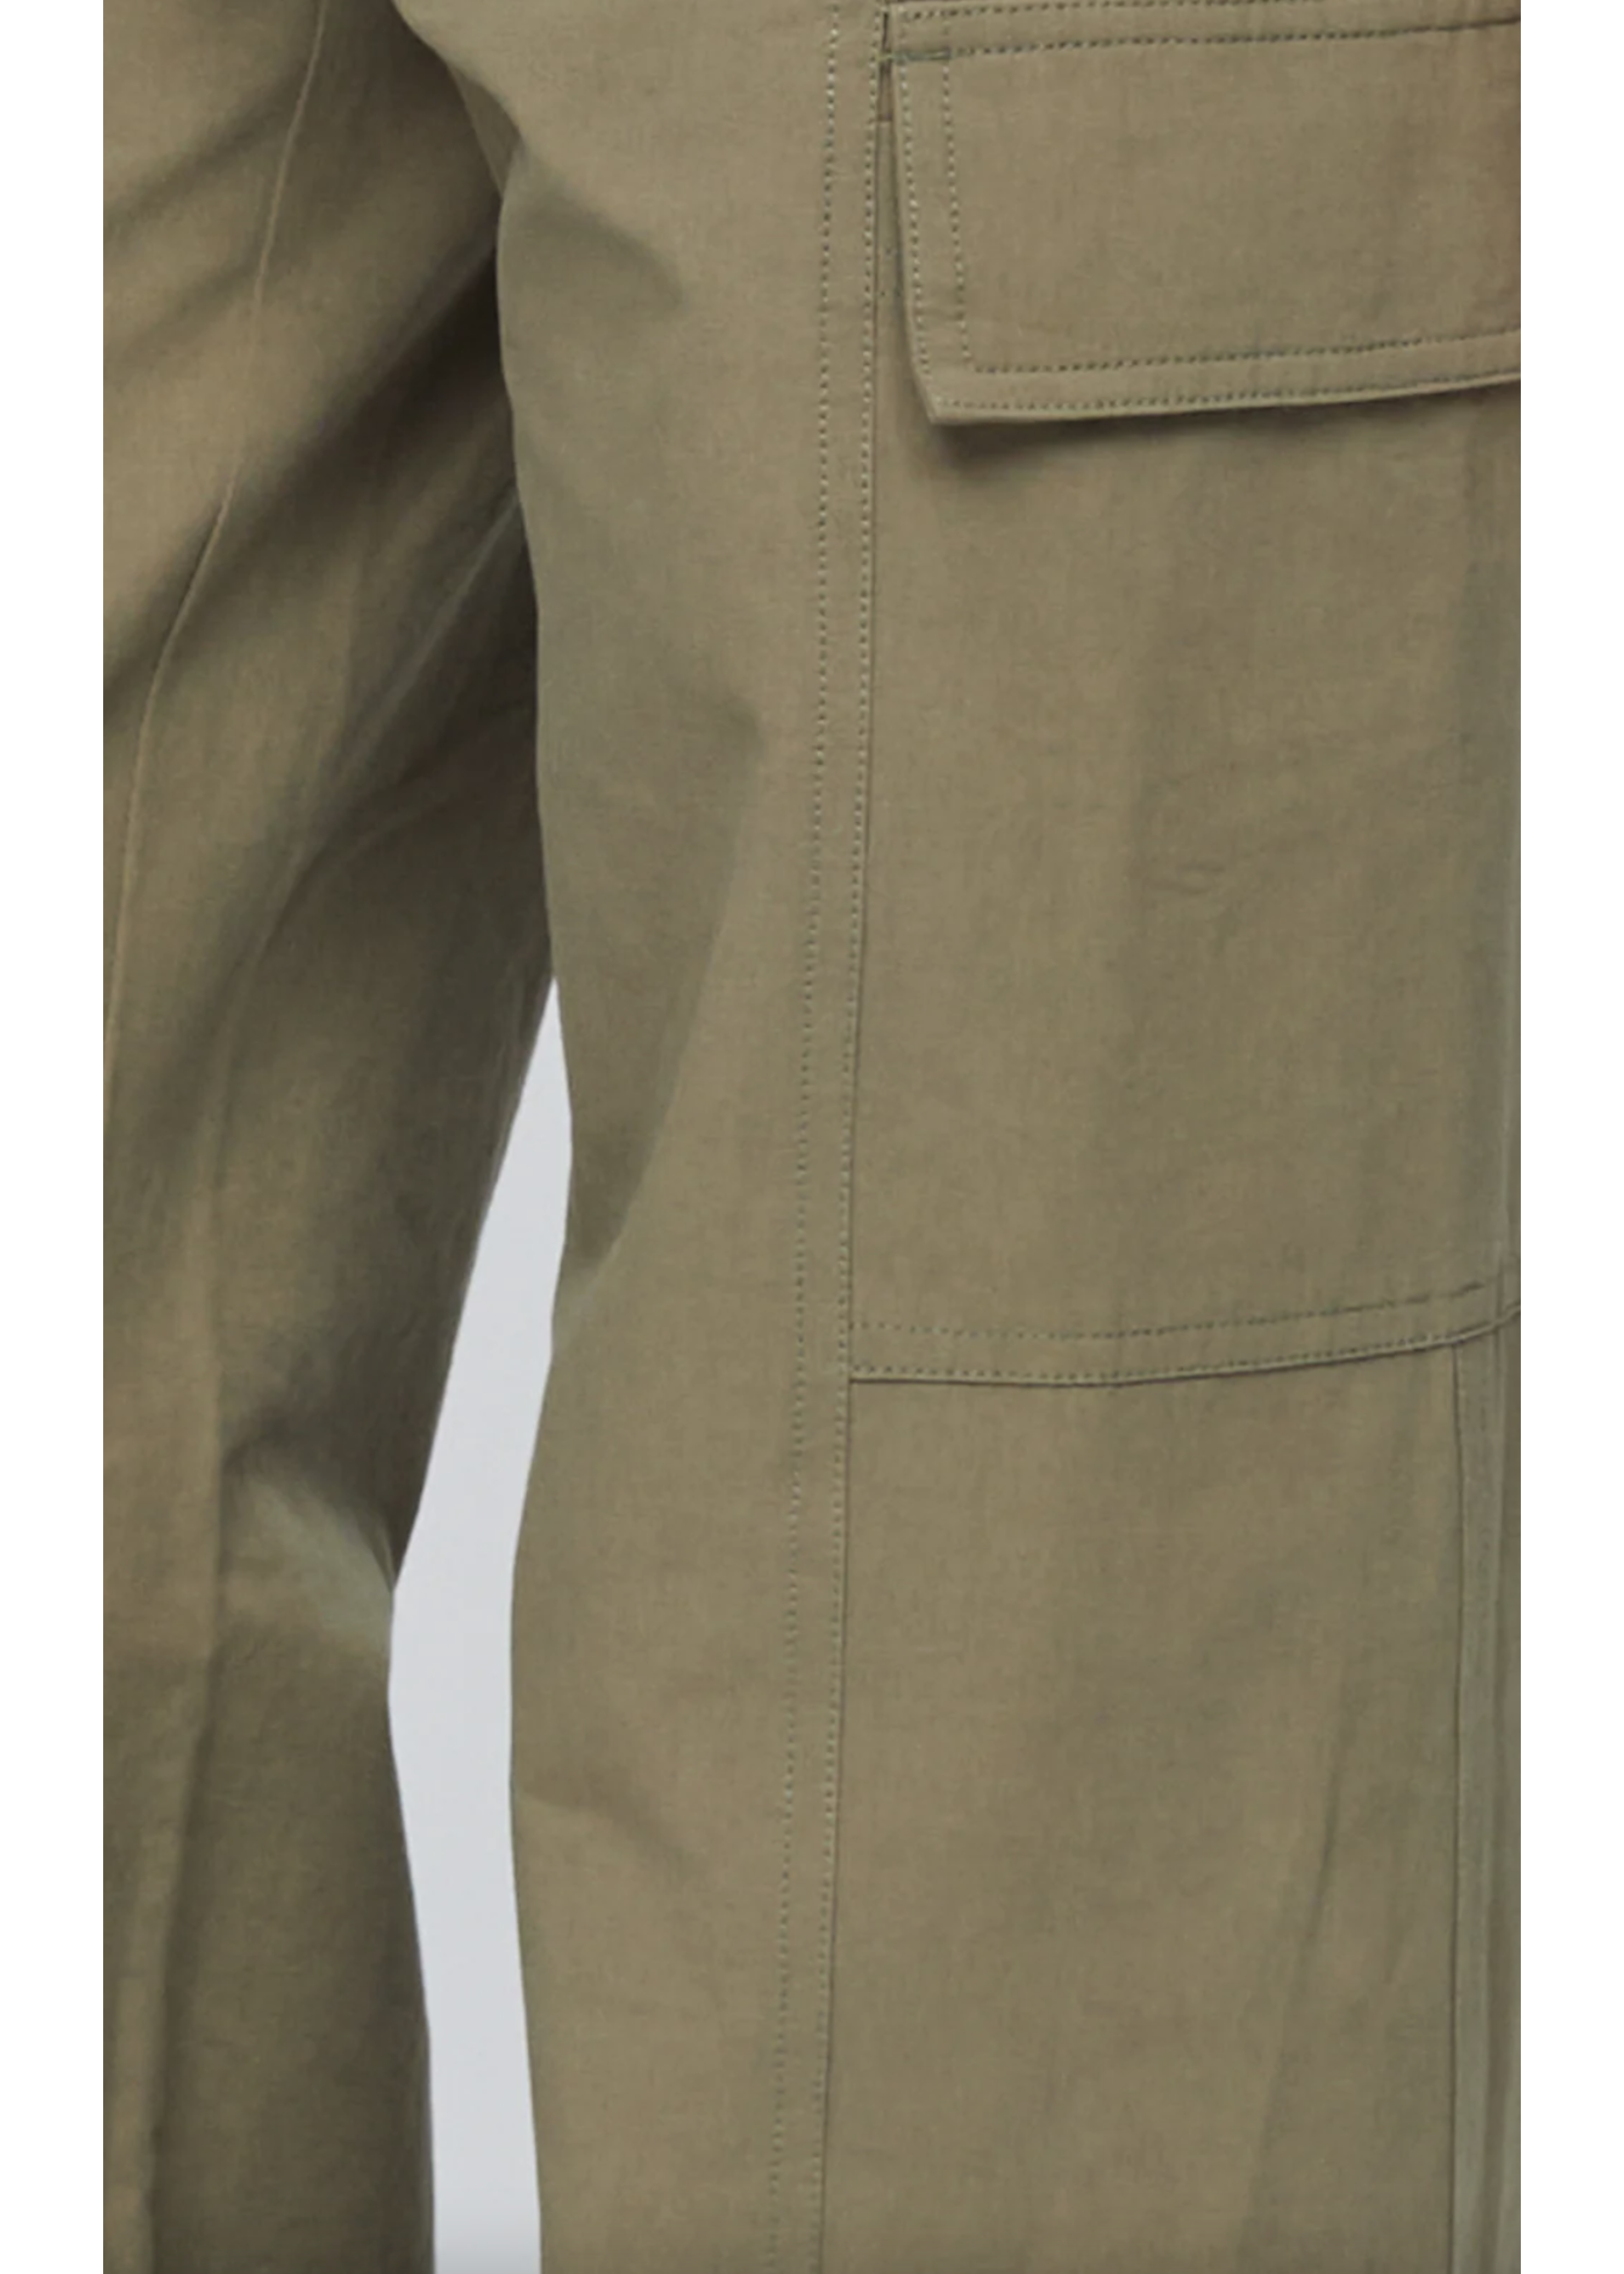 Khaki Leather Pants with Pockets – RileyRae Boutique